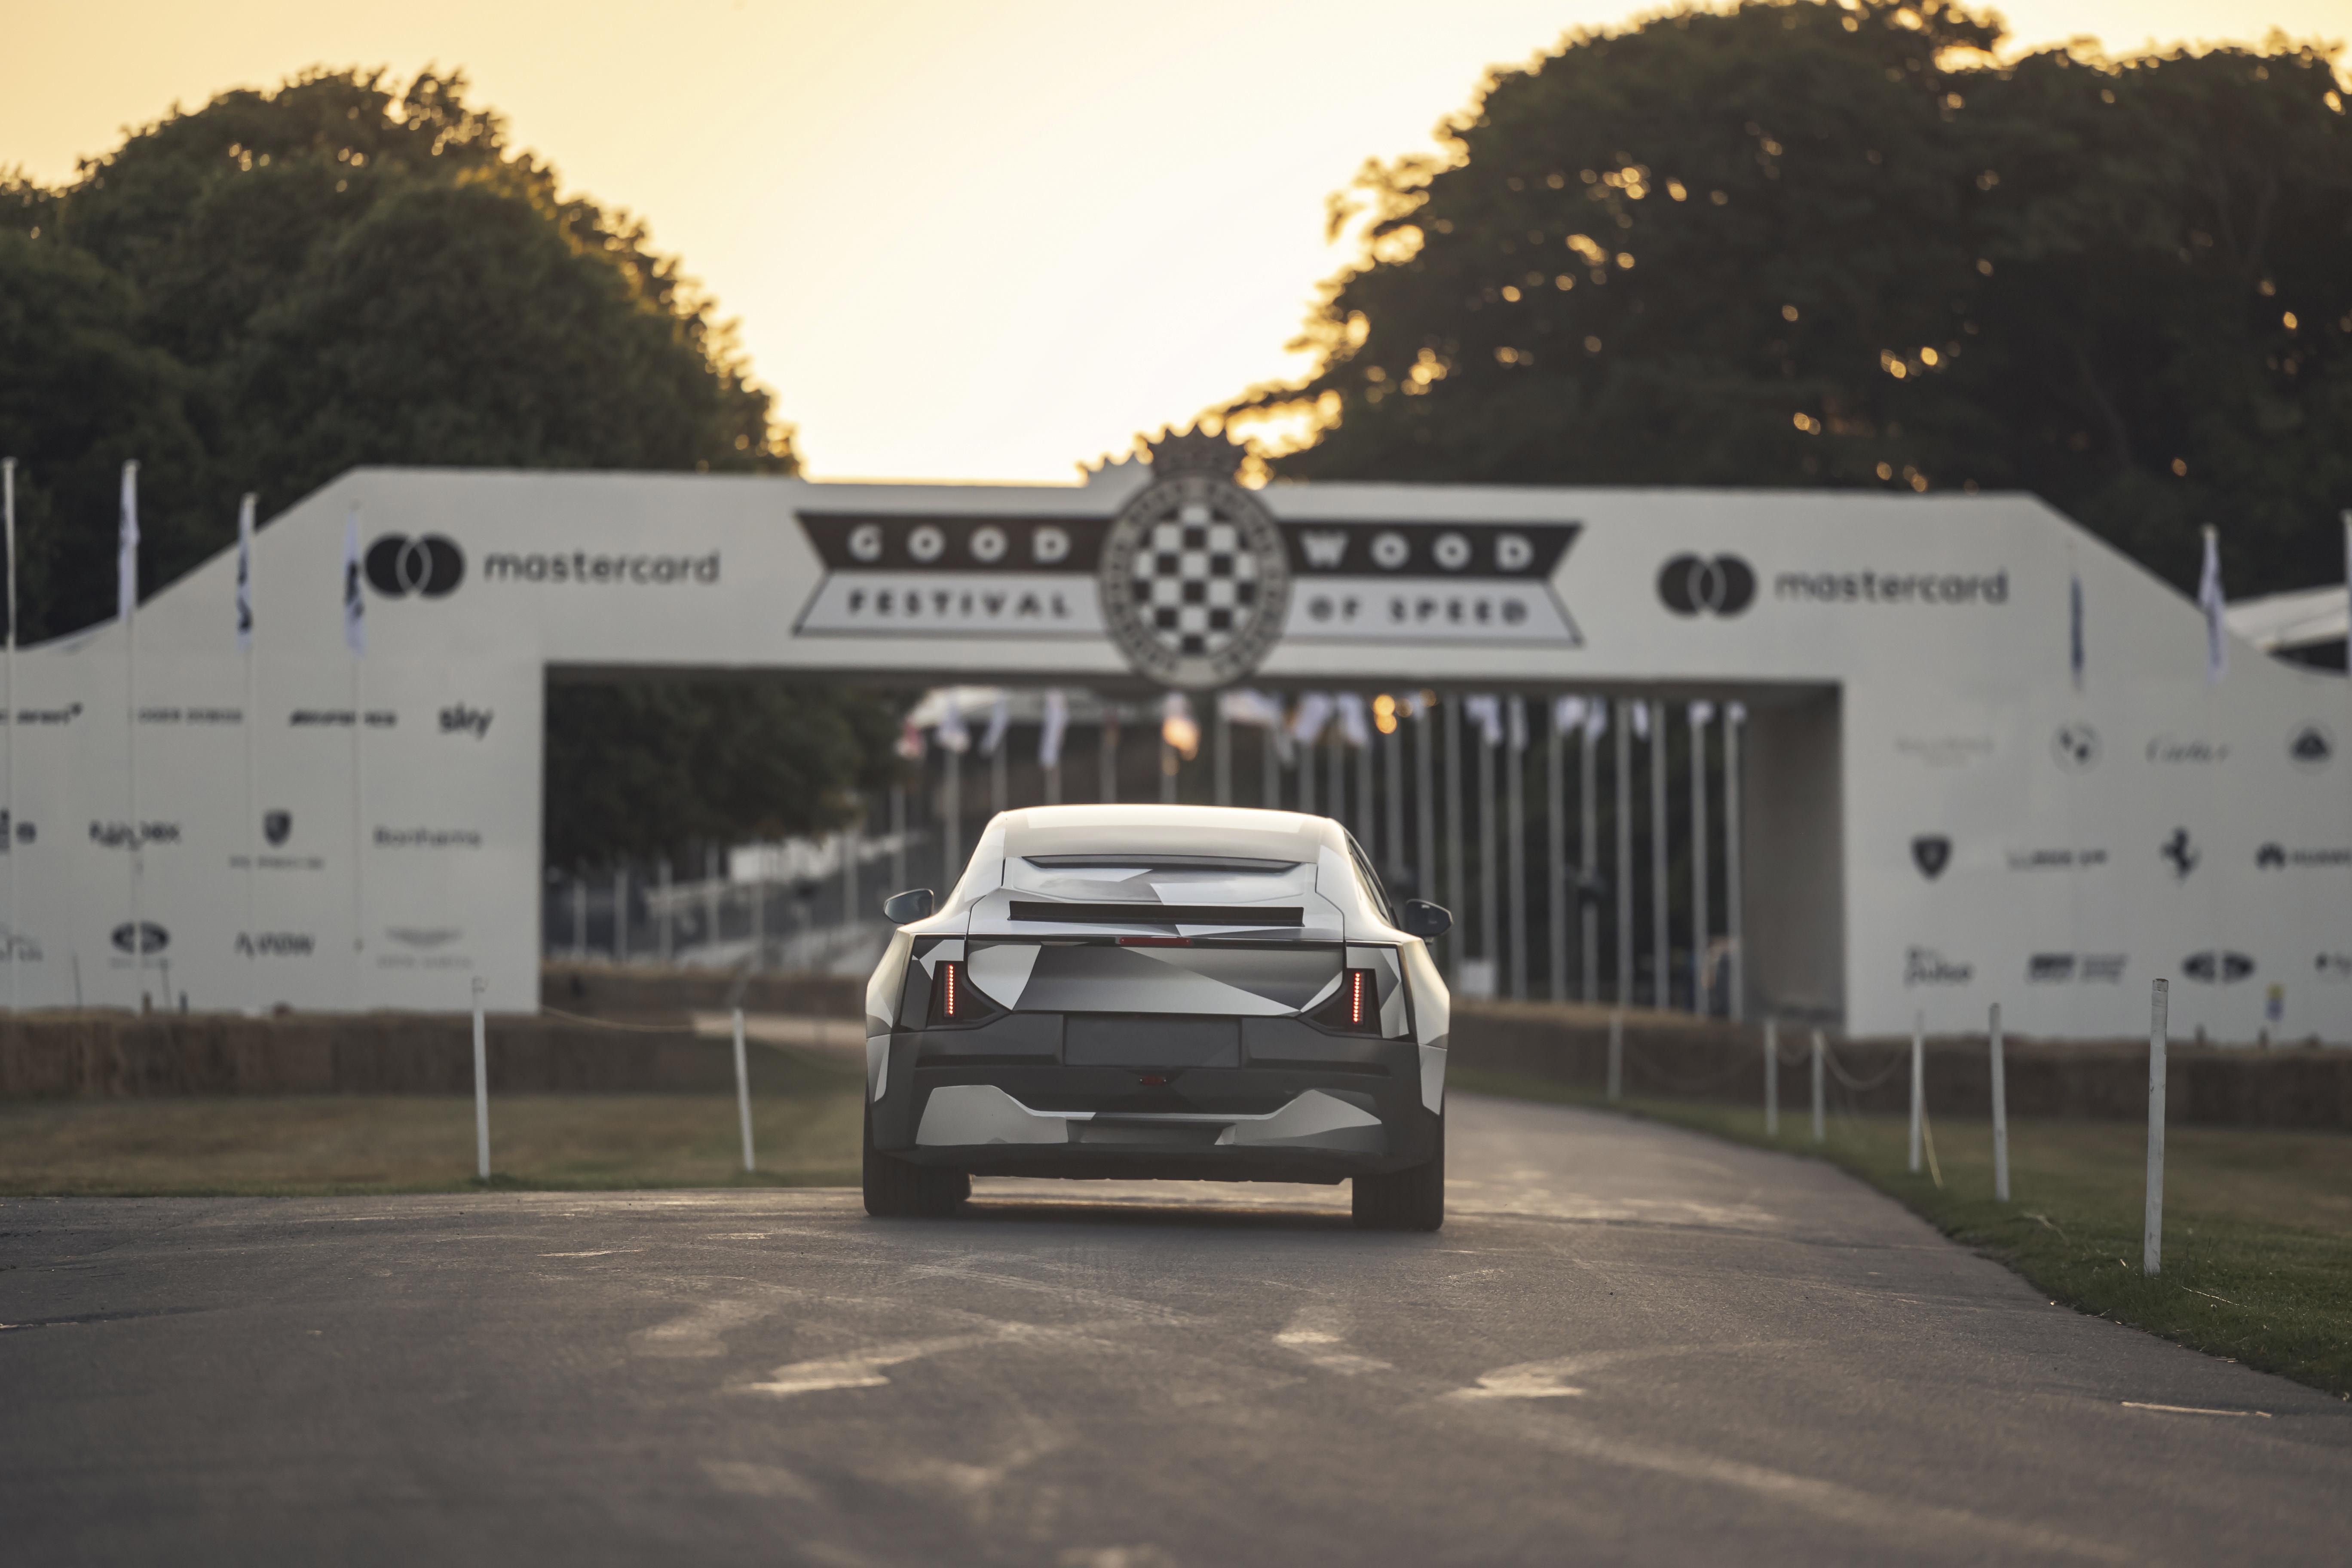 2022 Goodwood Festival of Speed: All the new cars | CarExpert